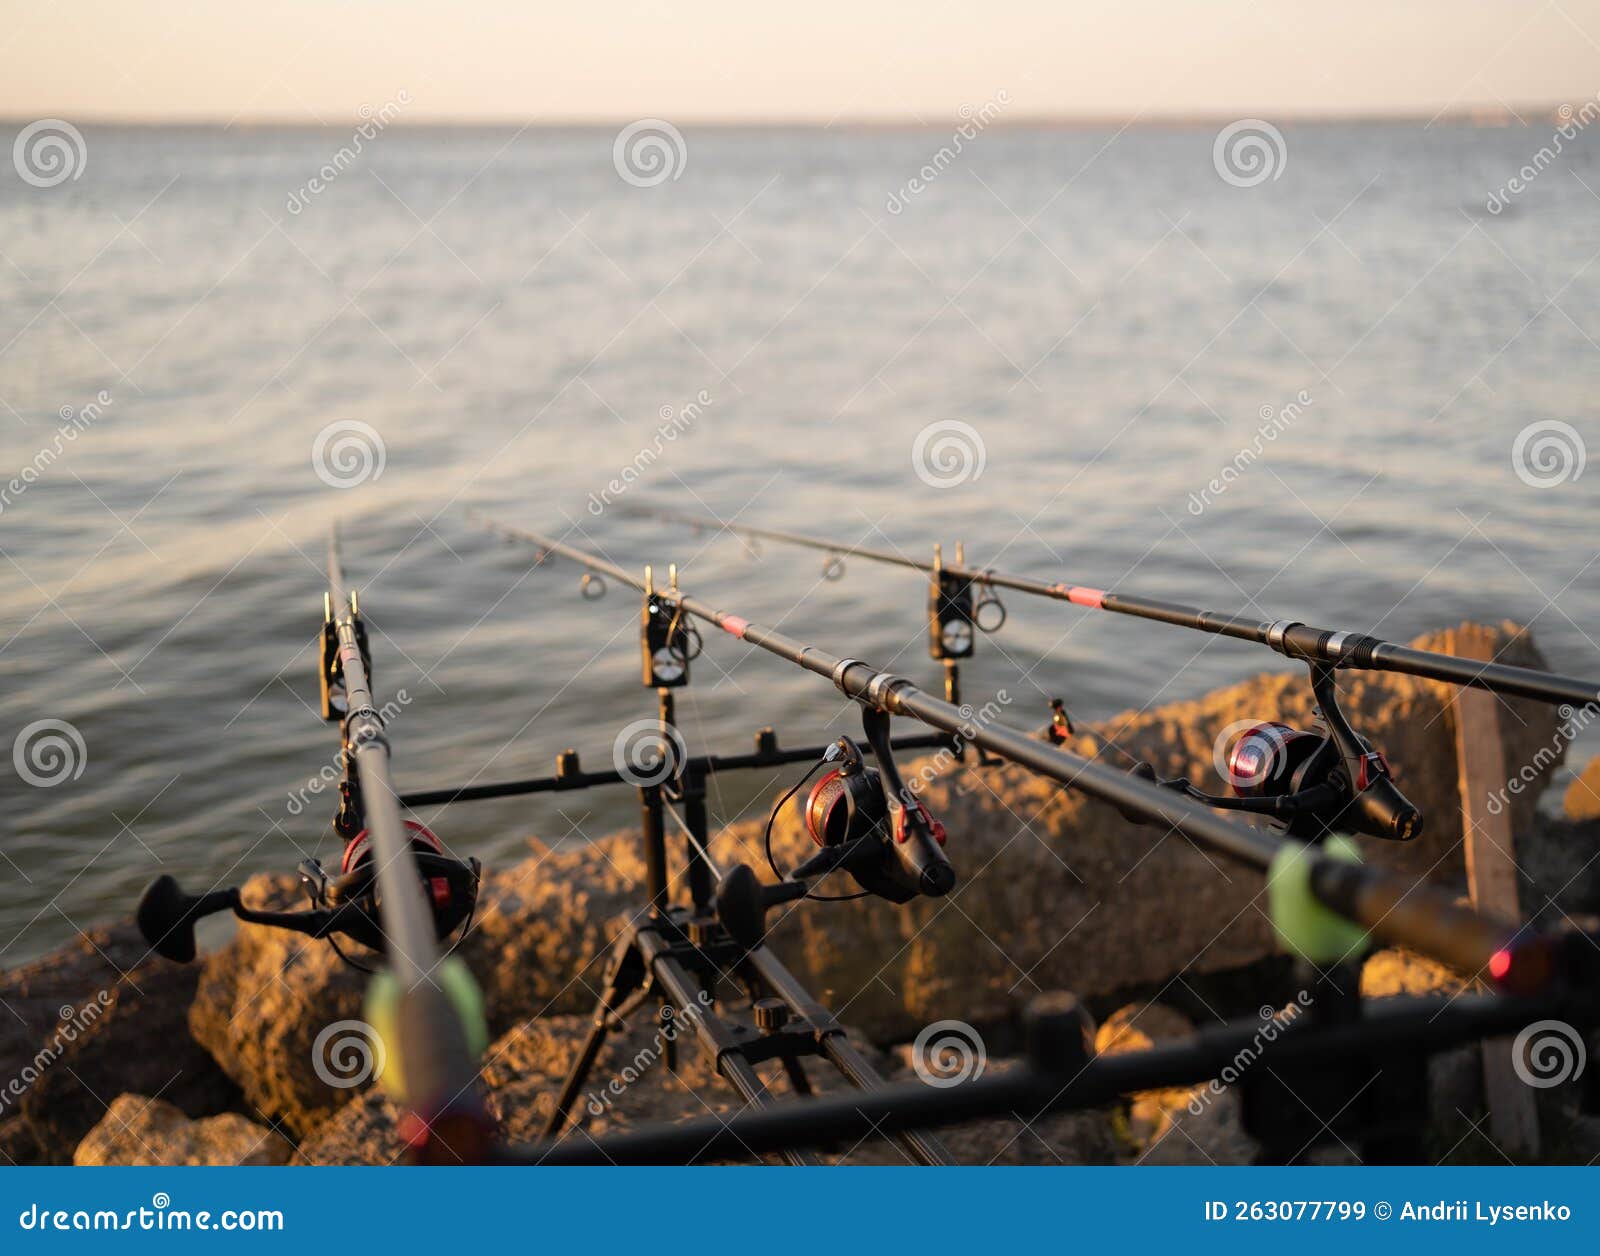 Carp Rod on the Stand on Fishing. Stock Image - Image of catch, summer:  263077799